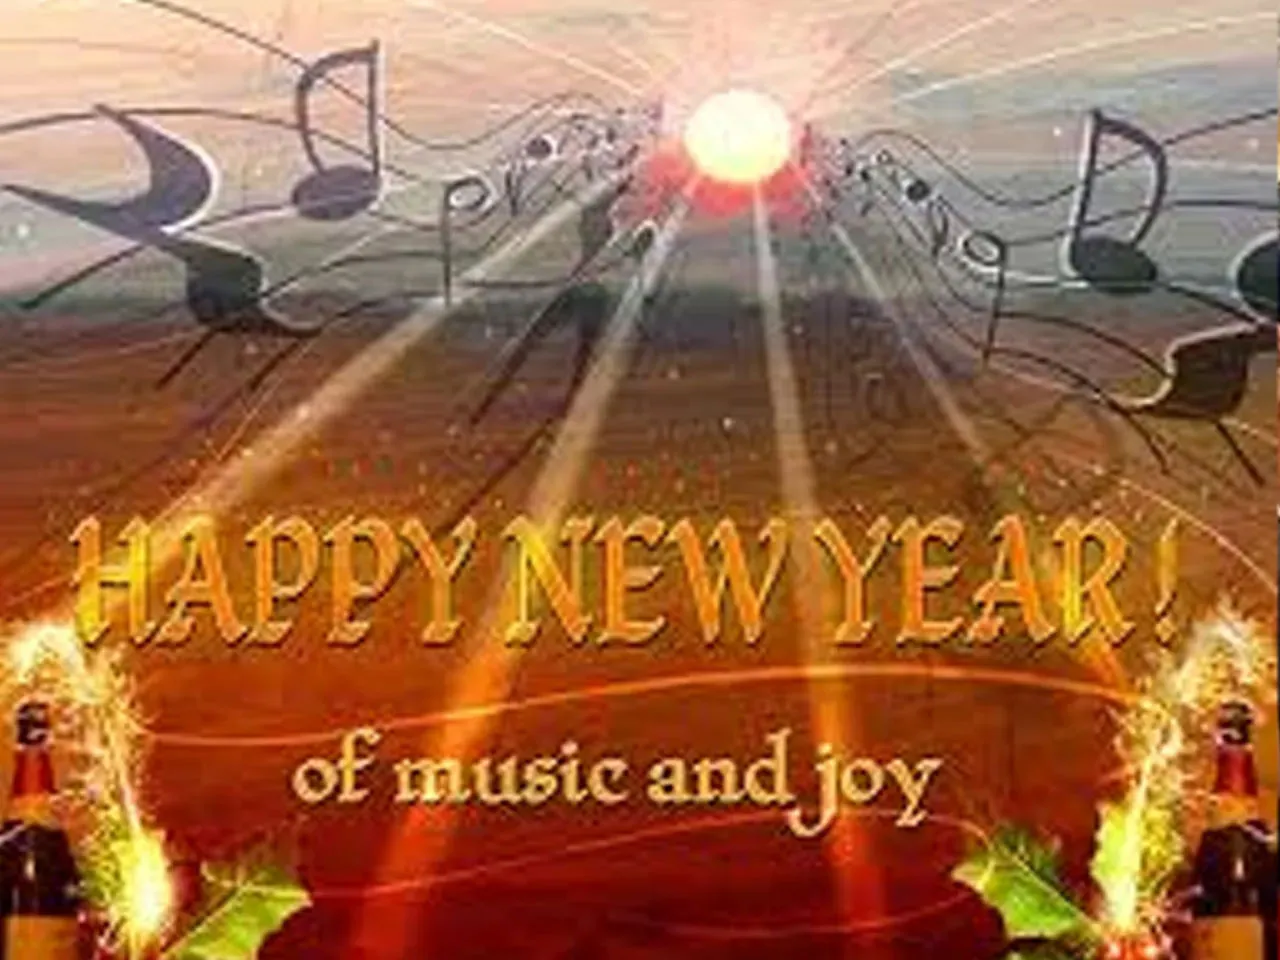 Know some special songs to welcome the new year